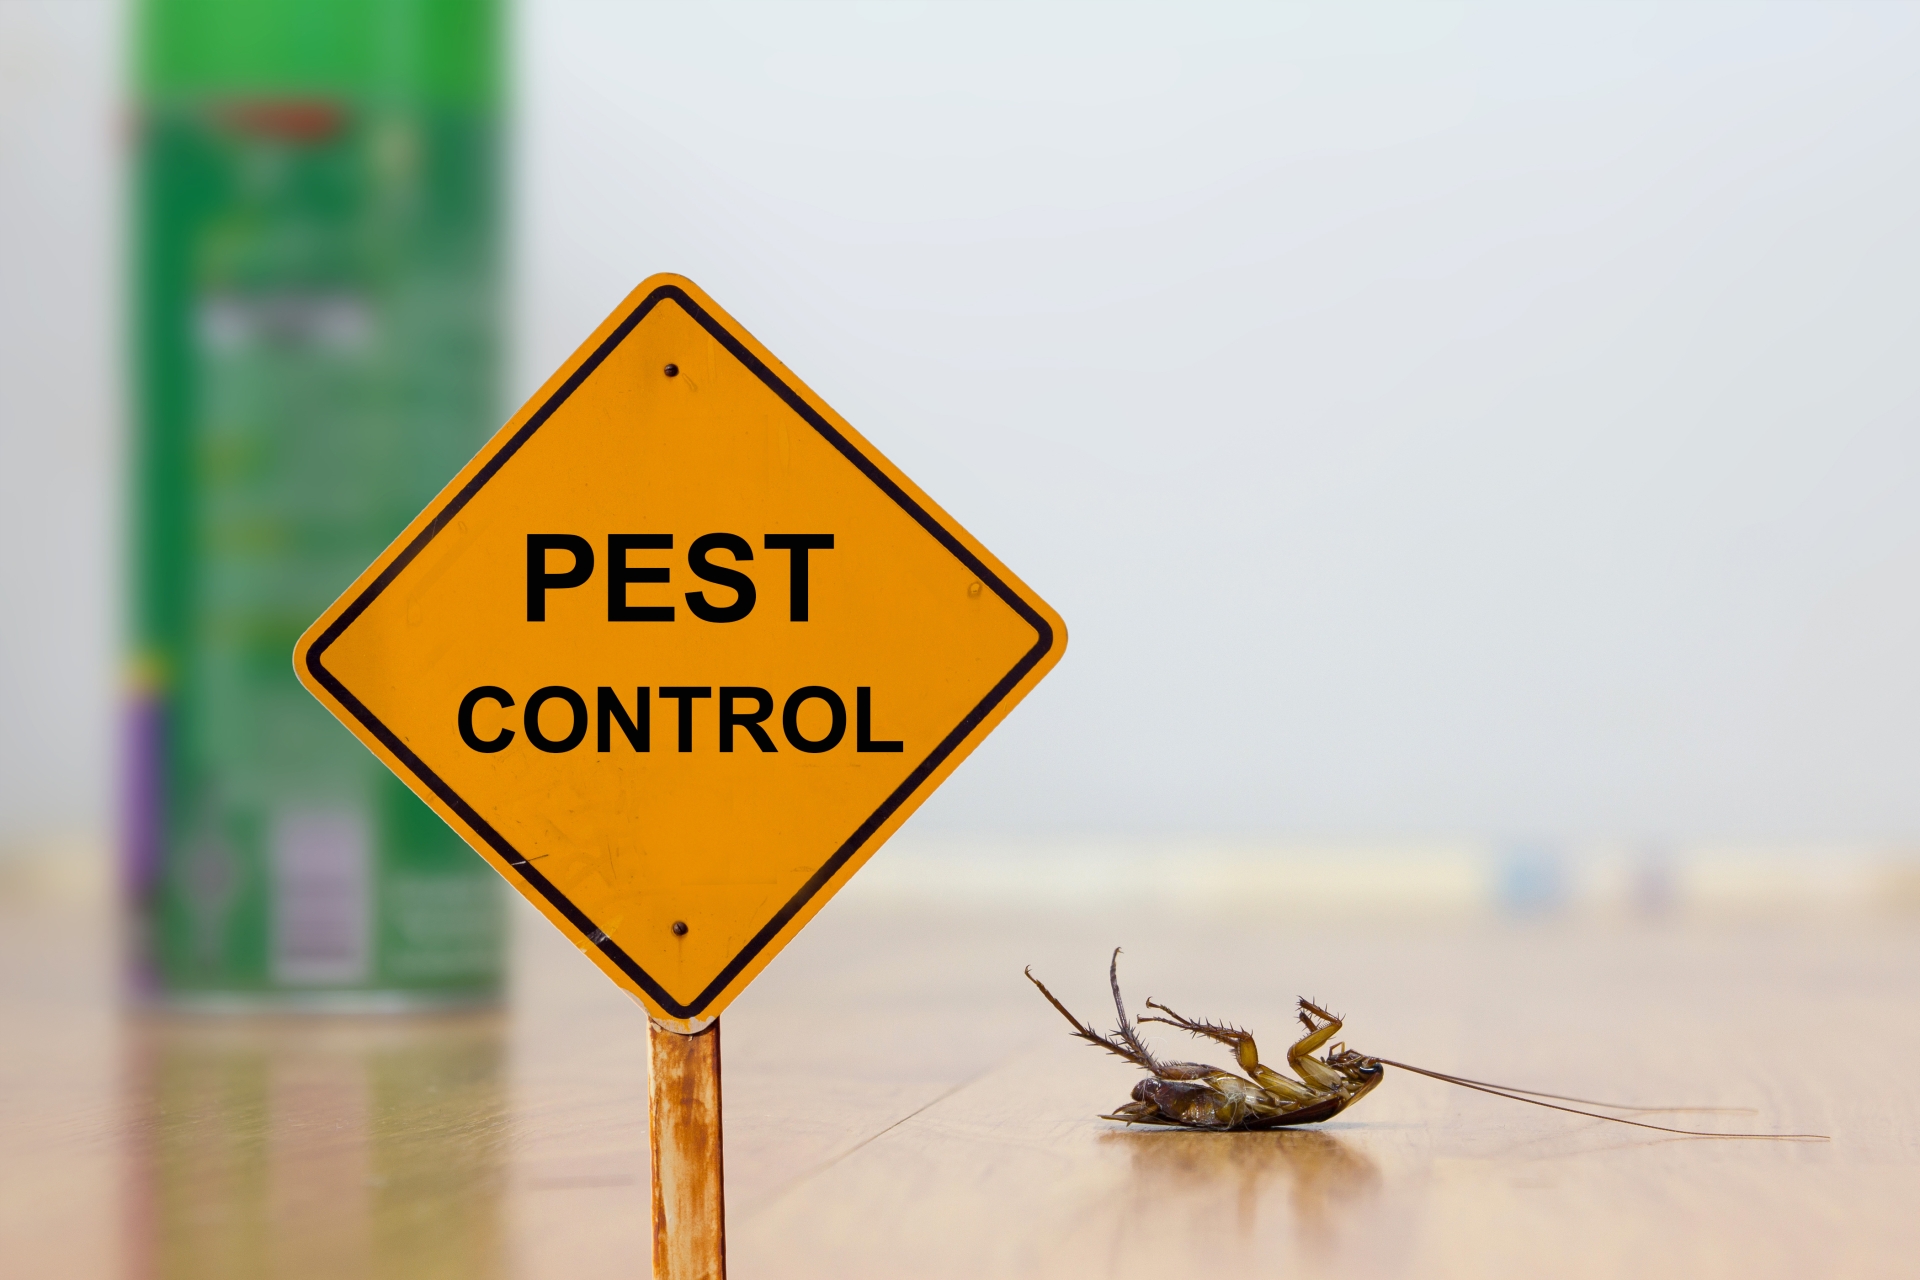 24 Hour Pest Control, Pest Control in Fulham, SW6. Call Now 020 8166 9746